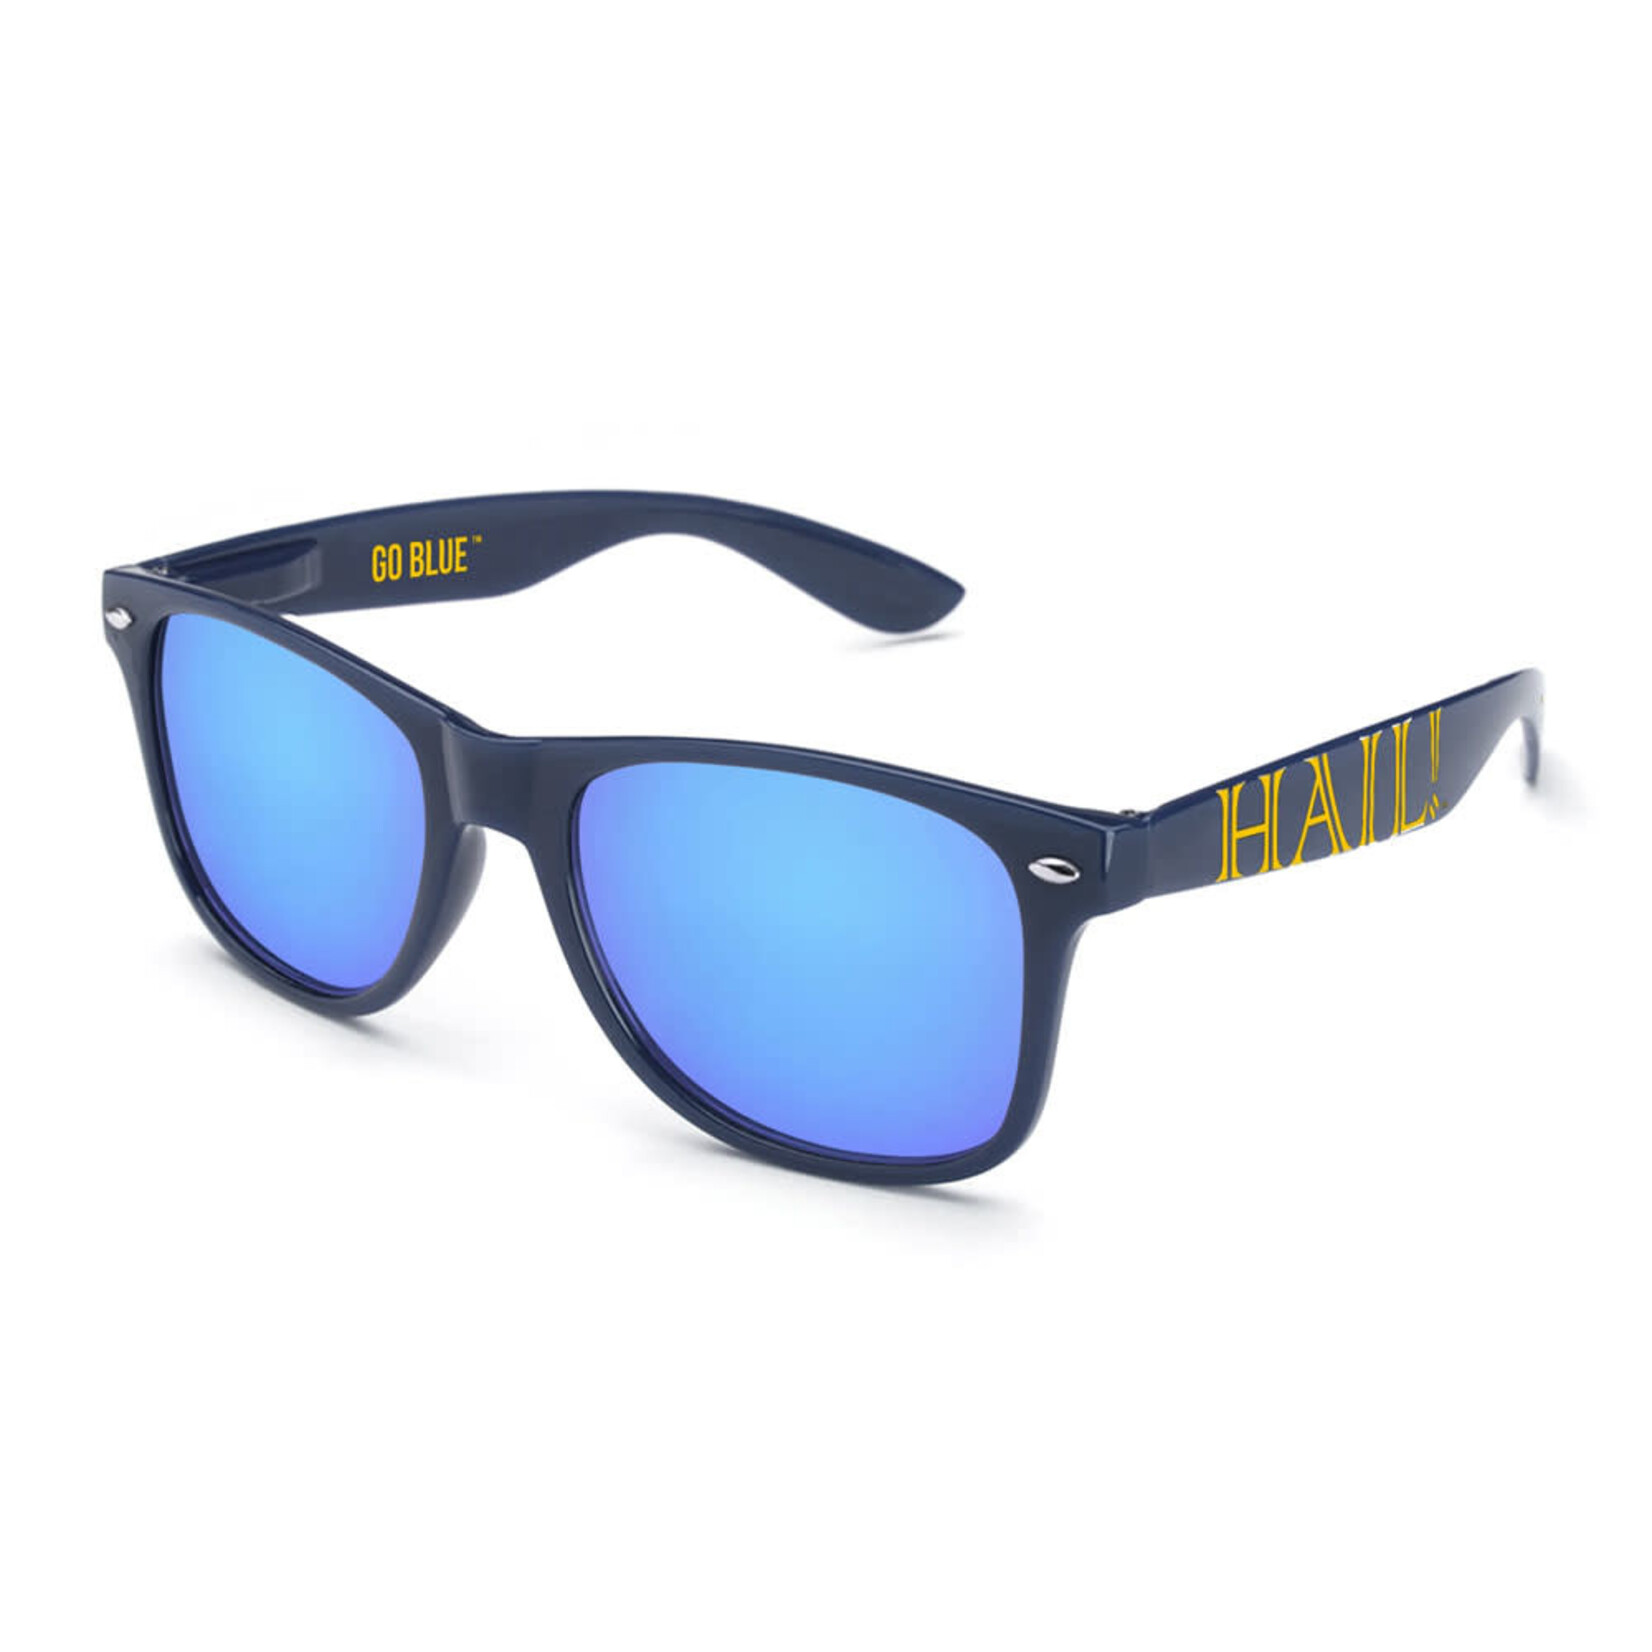 Society 43 NCAA Michigan Wolverines Sunglasses Limited Edition Blue Frame Hail